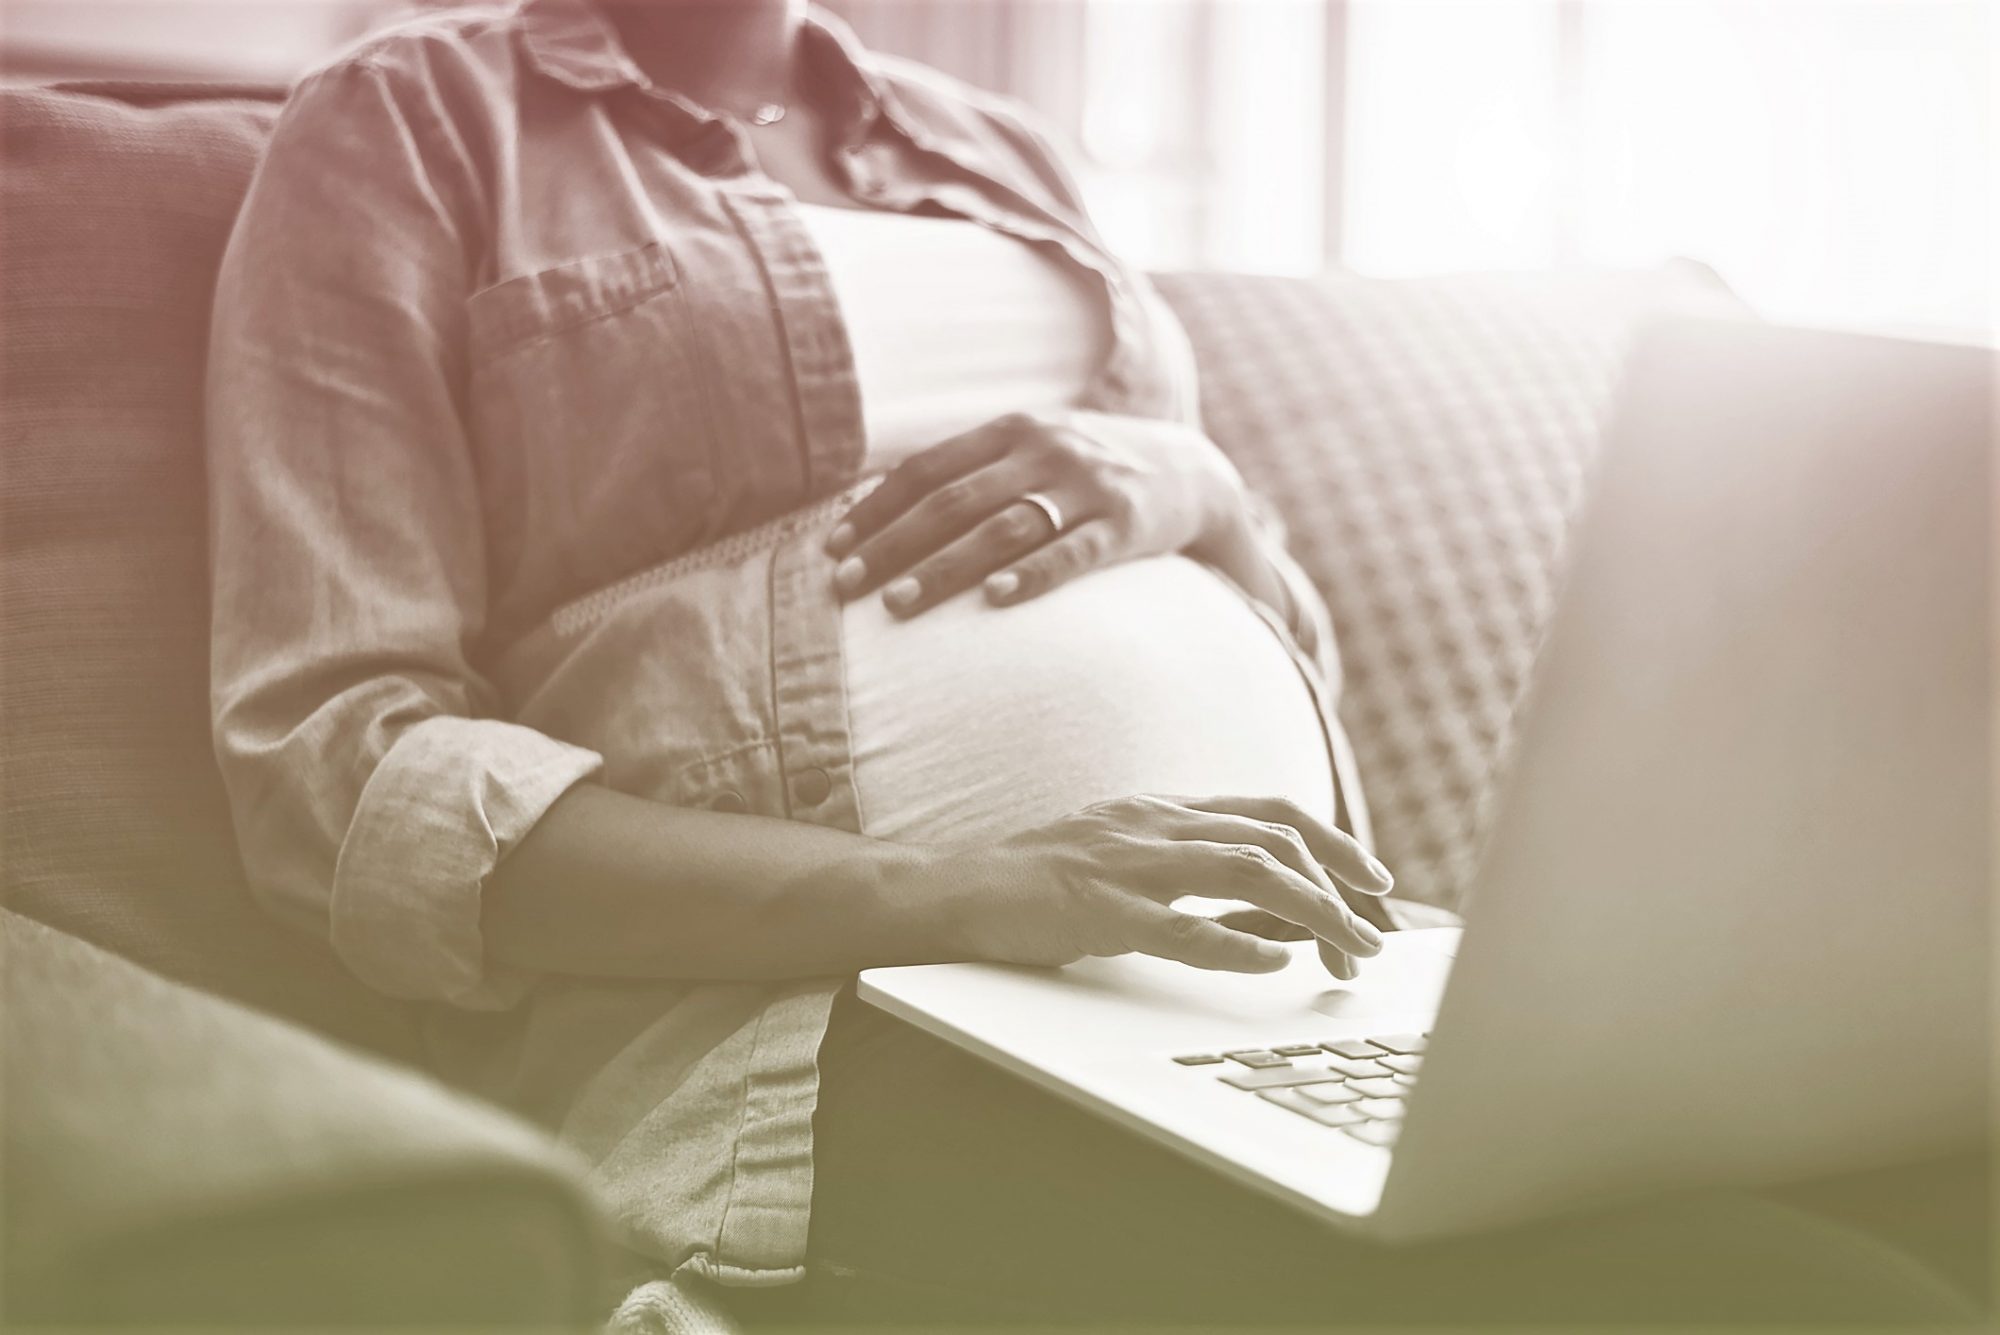 Pregnant woman with hand on belly using laptop